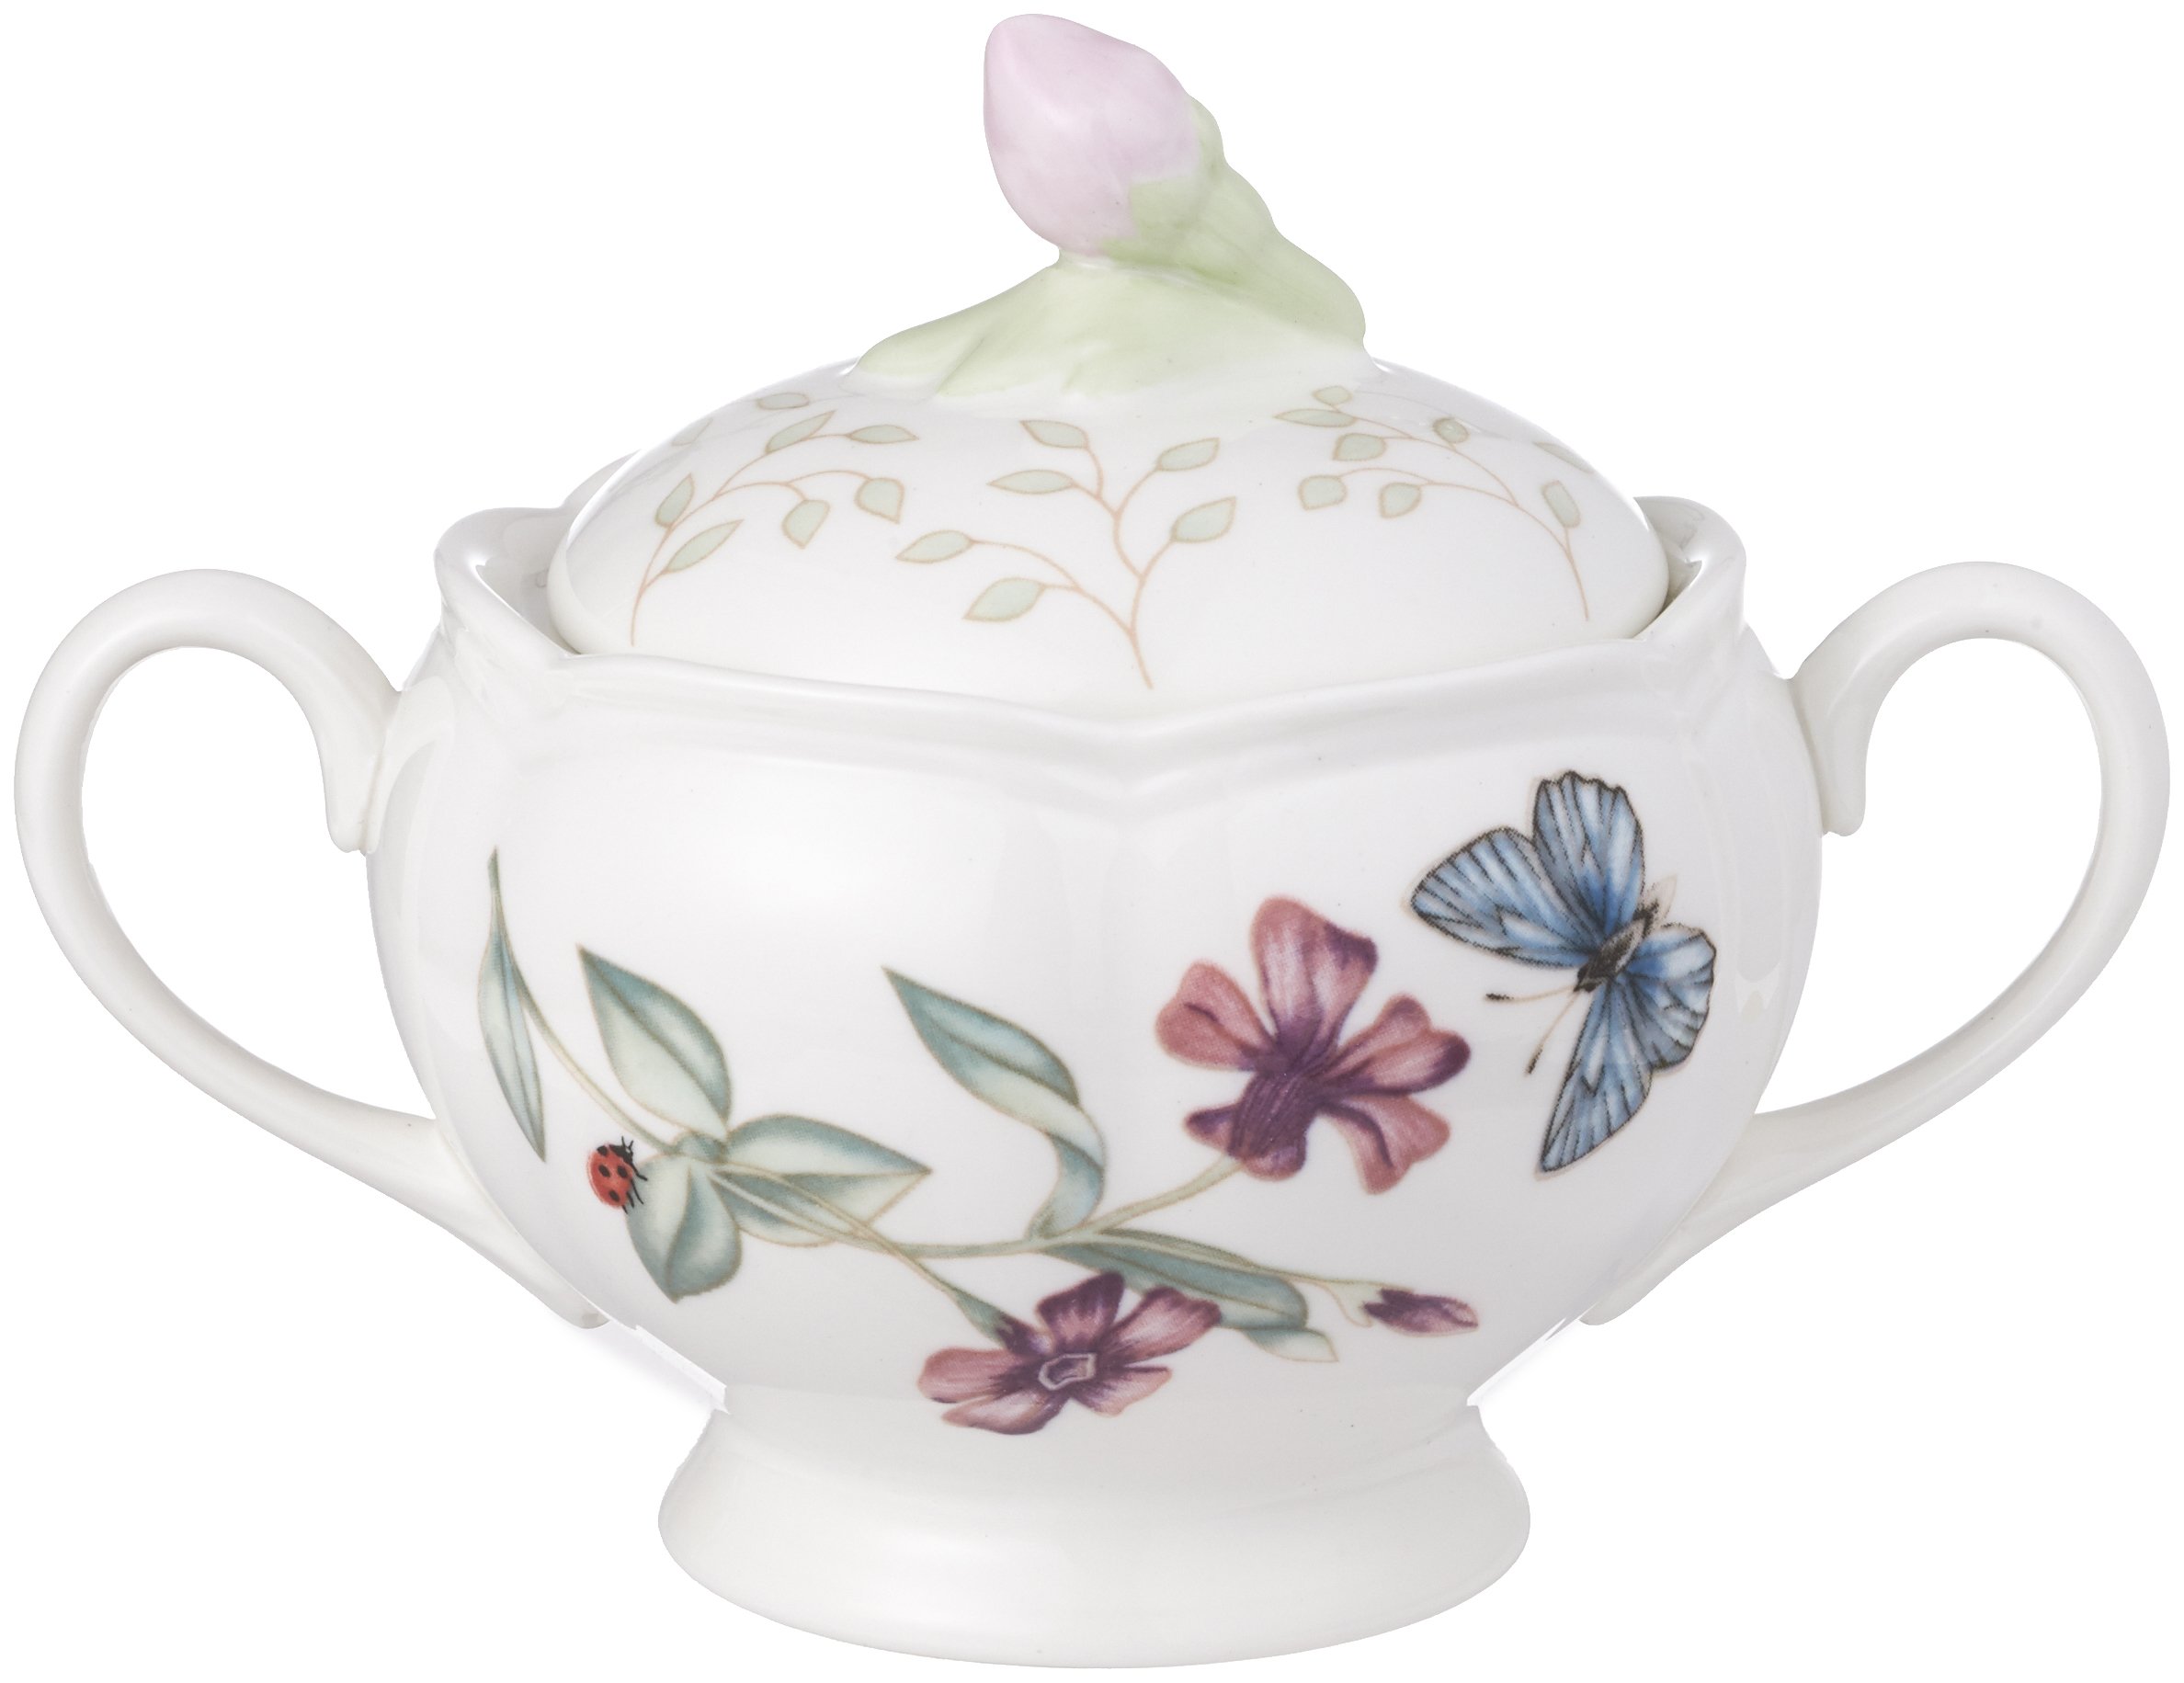 Lenox Butterfly Meadow Double Handled Sugar Bowl with Lid, White -